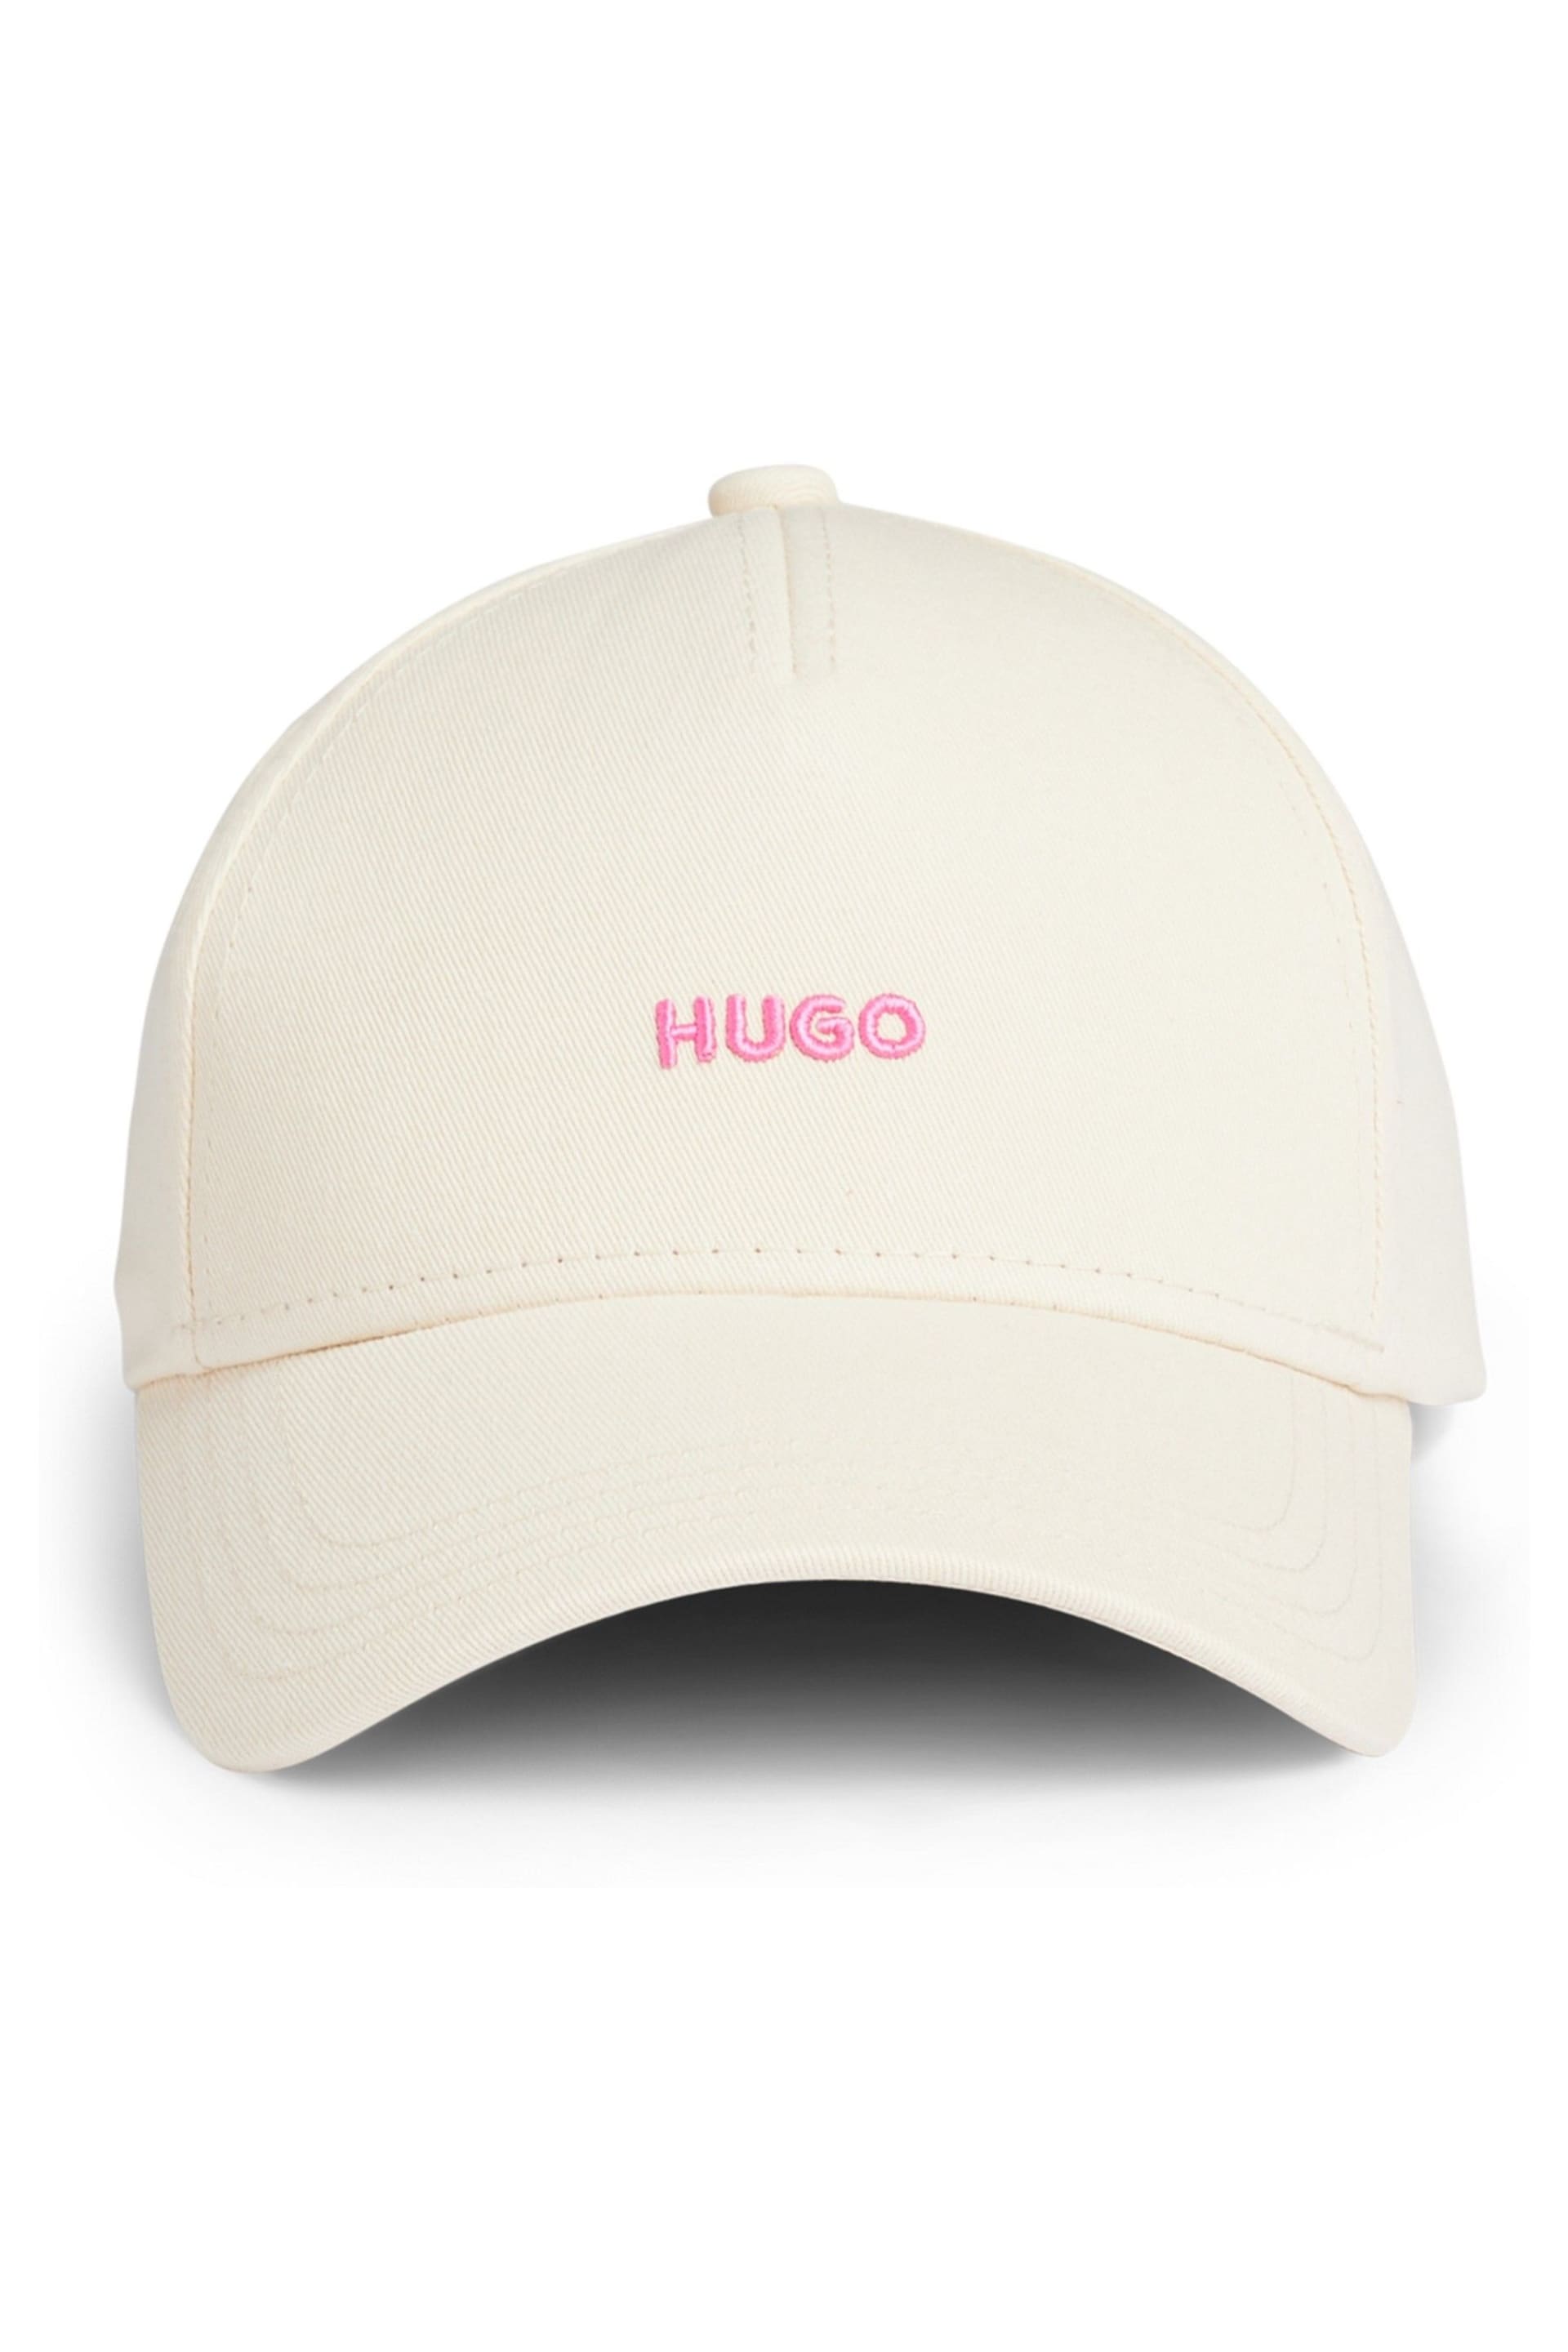 HUGO Natural Cotton Twill Cap With Embroidered Logo - Image 5 of 5